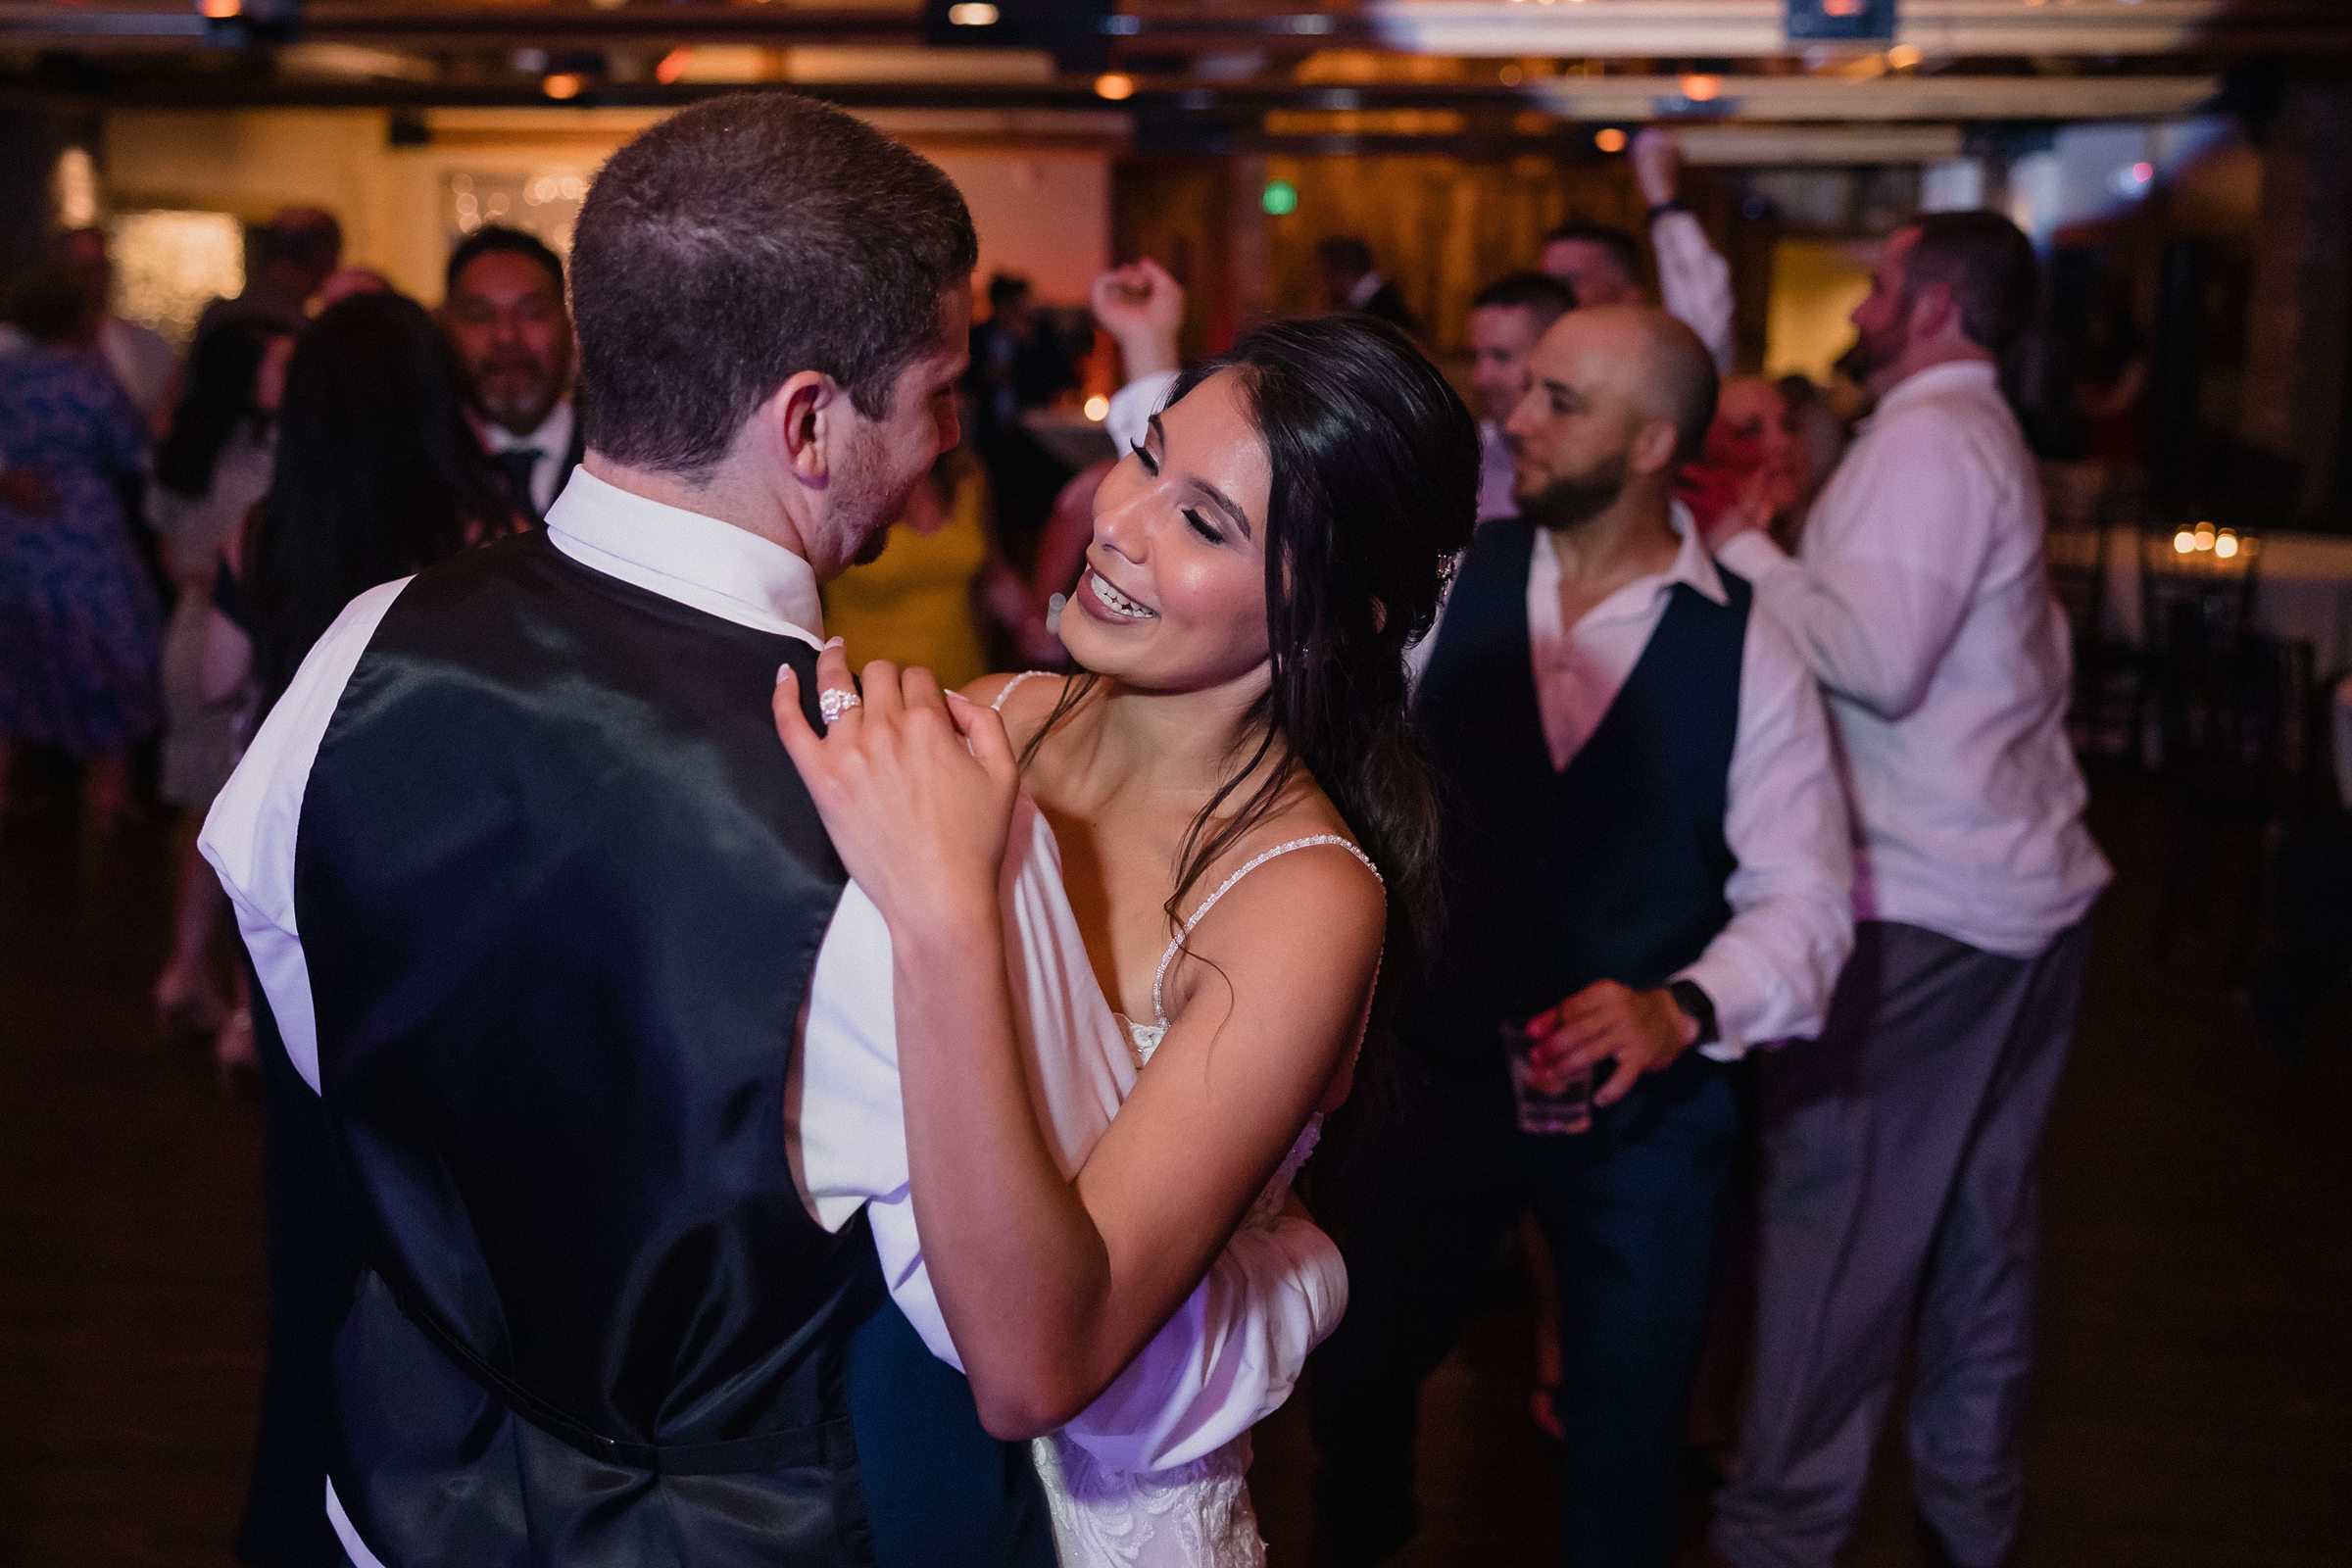 Bride and Groom dance together during their wedding at the Fisherman's Inn in Elburn, Illinois.